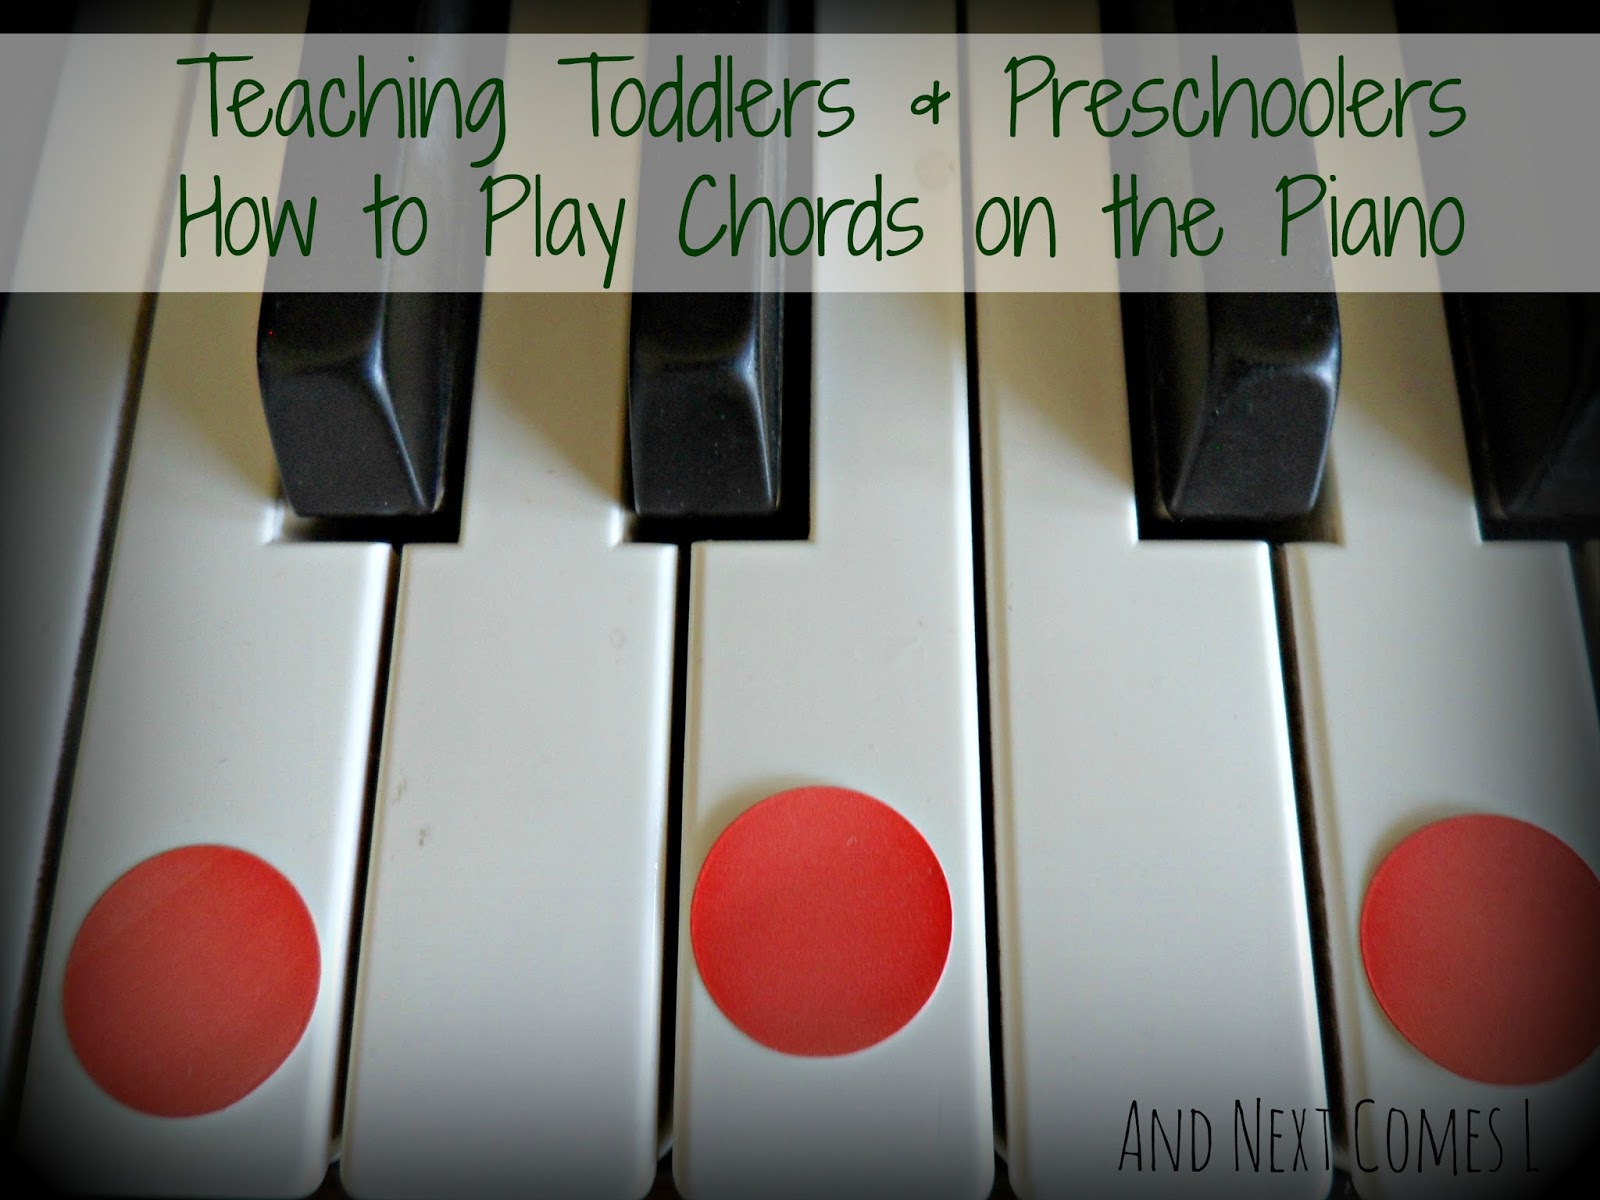 How to Pedal Chords on the Piano or Keyboard - dummies